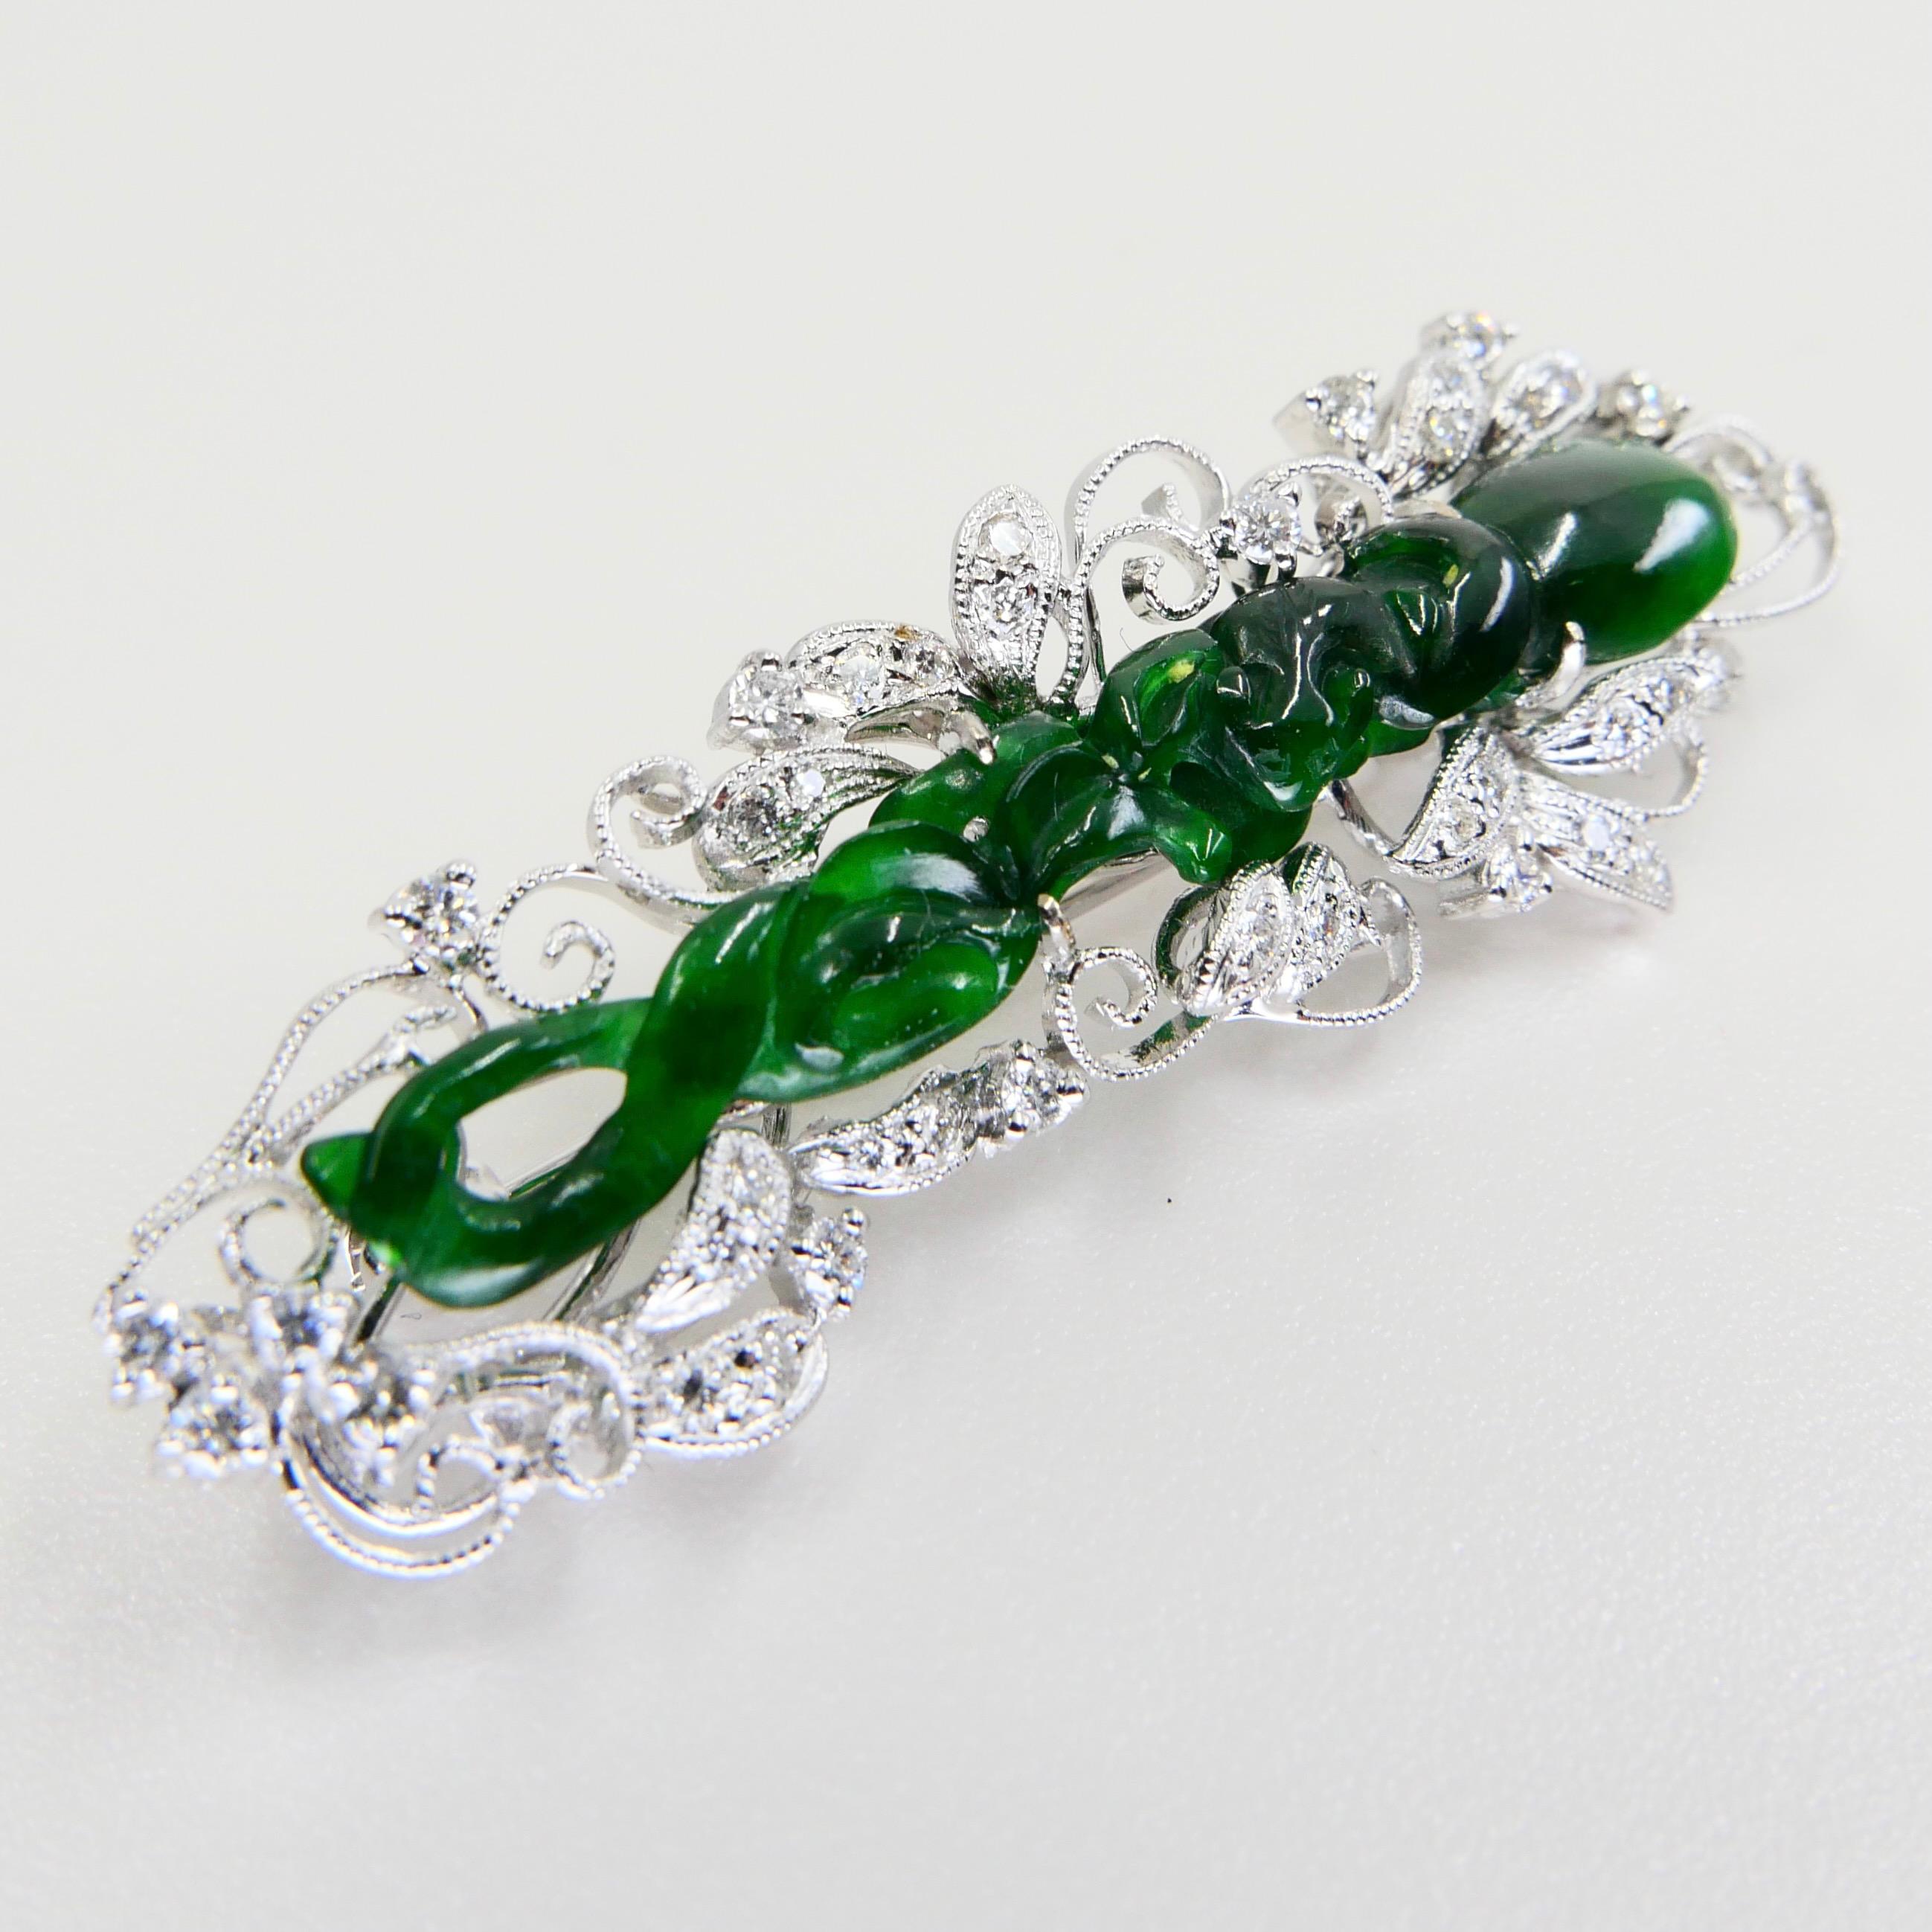 Certified Intense Green Carved Jade & Diamond Brooch, Close to Imperial Green For Sale 6